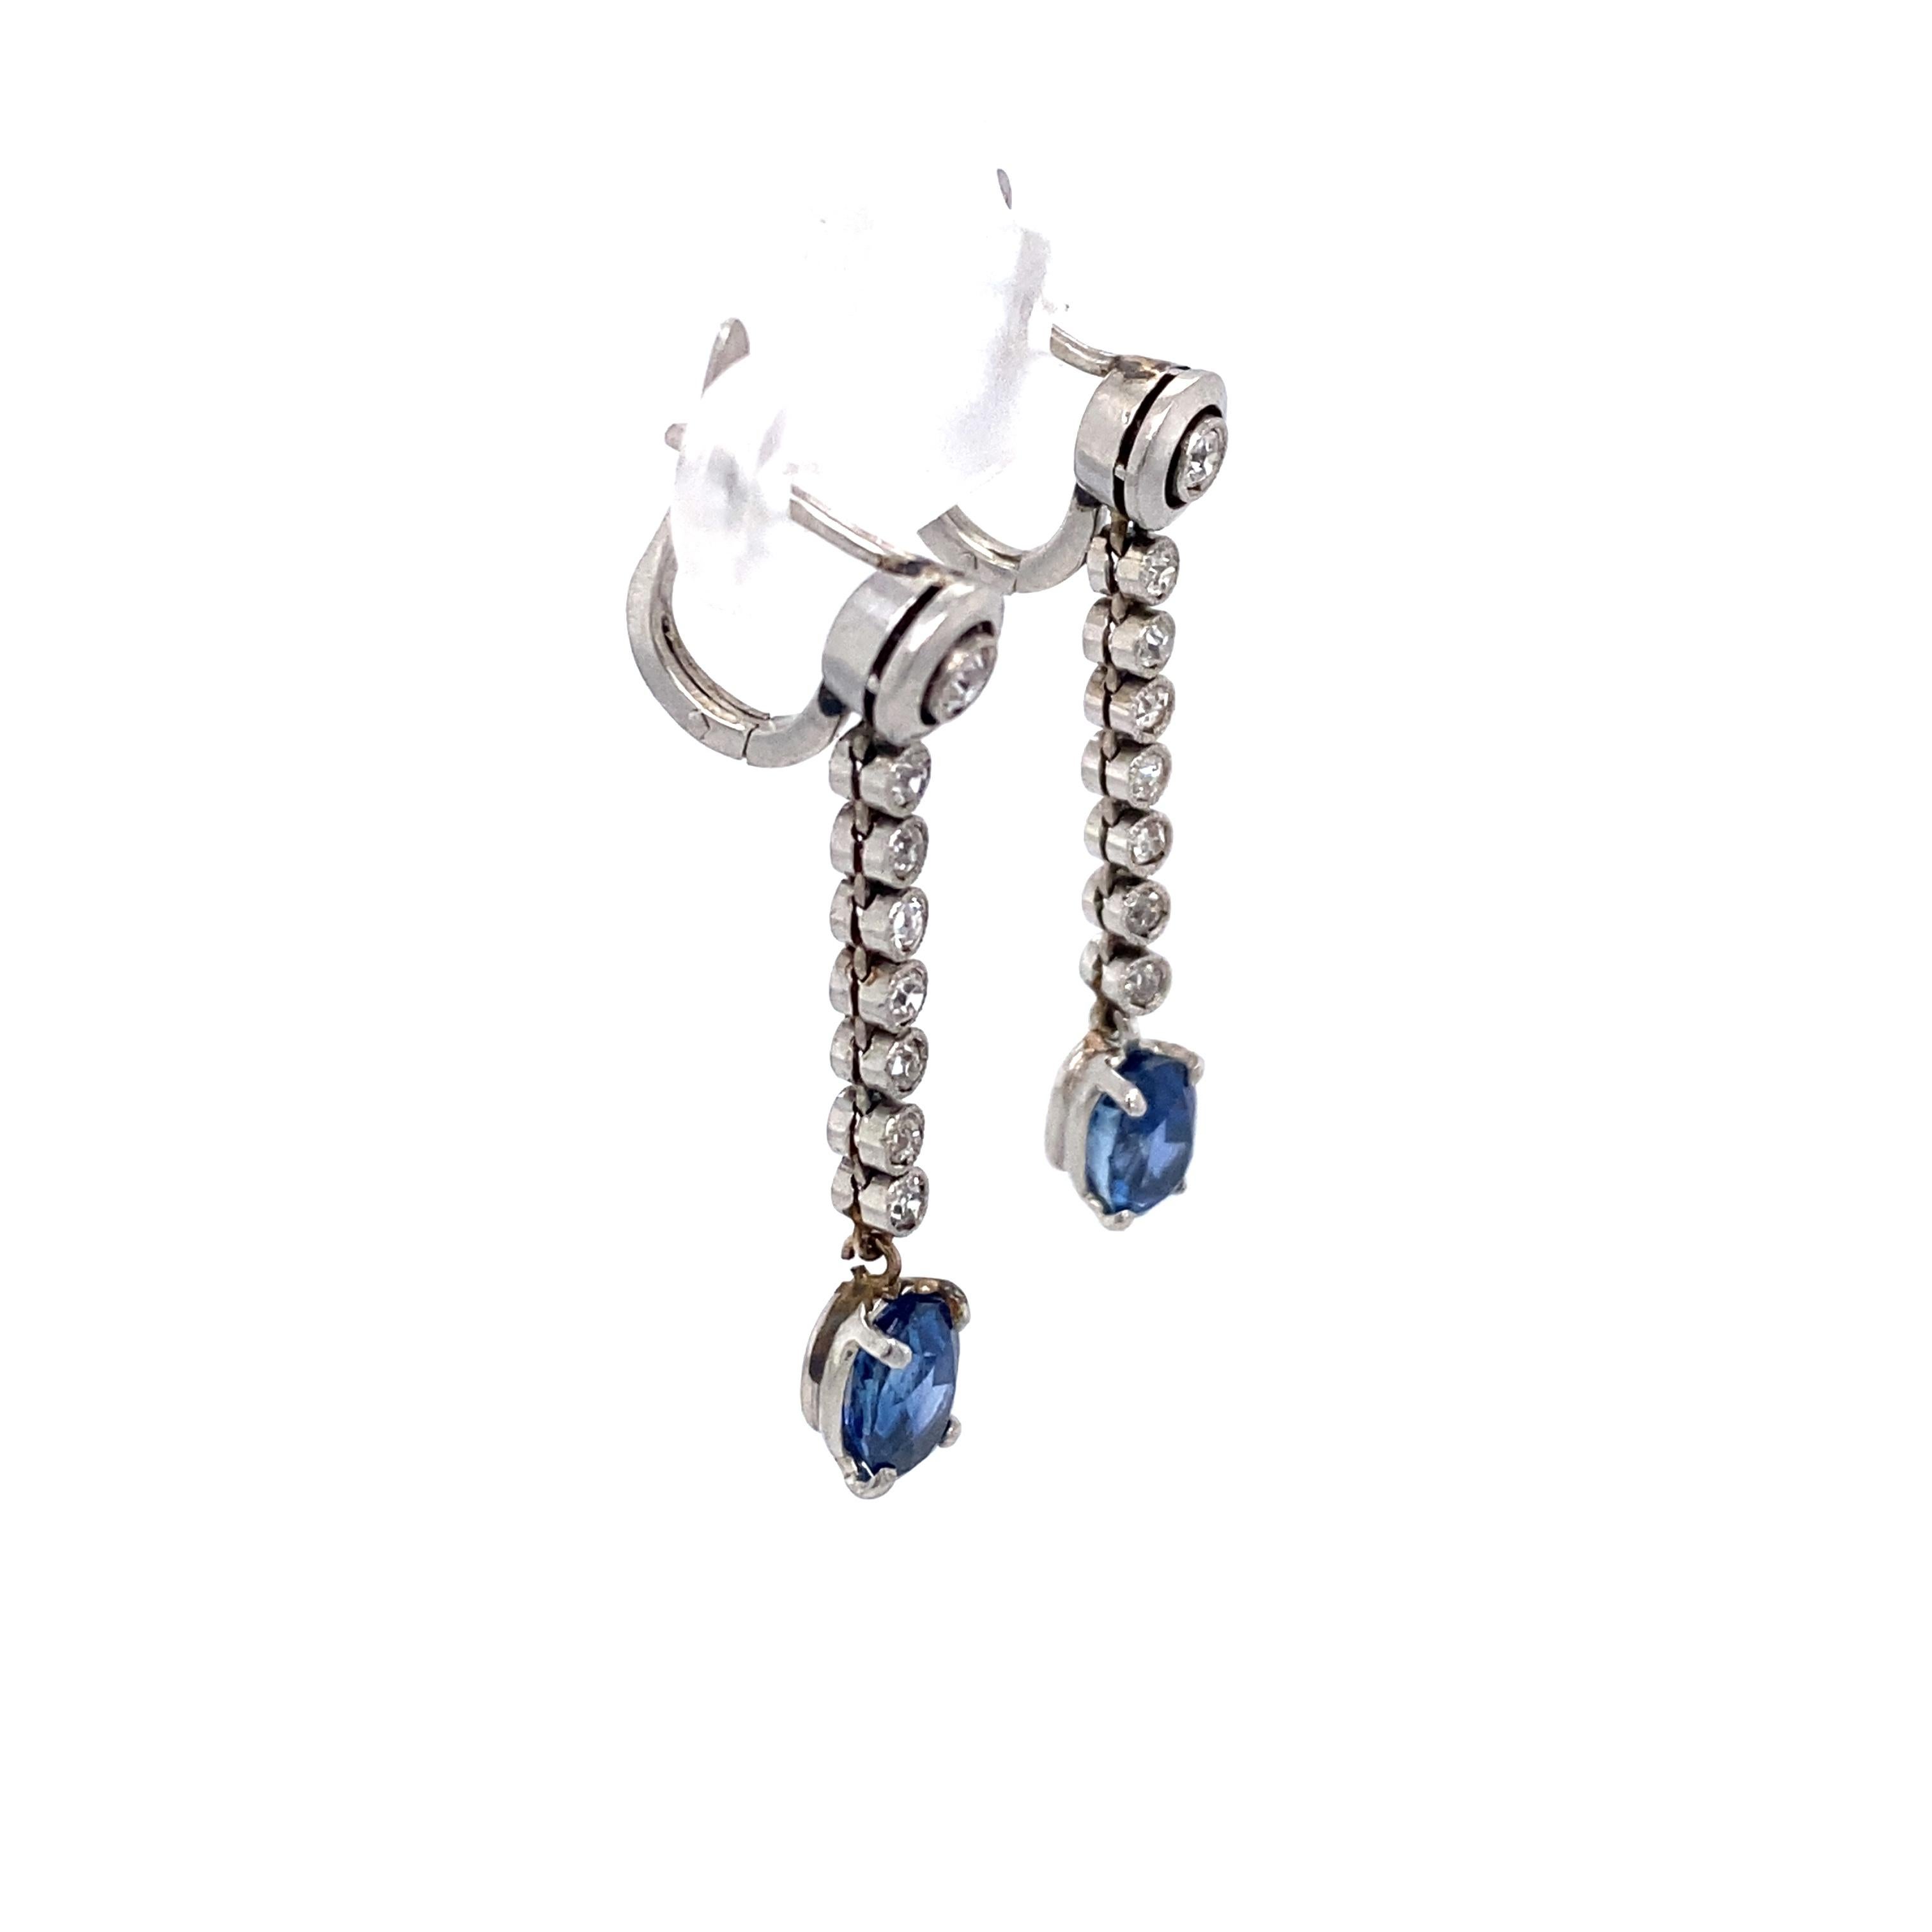 Oval Cut 1980s 2.3 Carat Sapphire and Diamond Earrings in 14K White Gold and Platinum For Sale